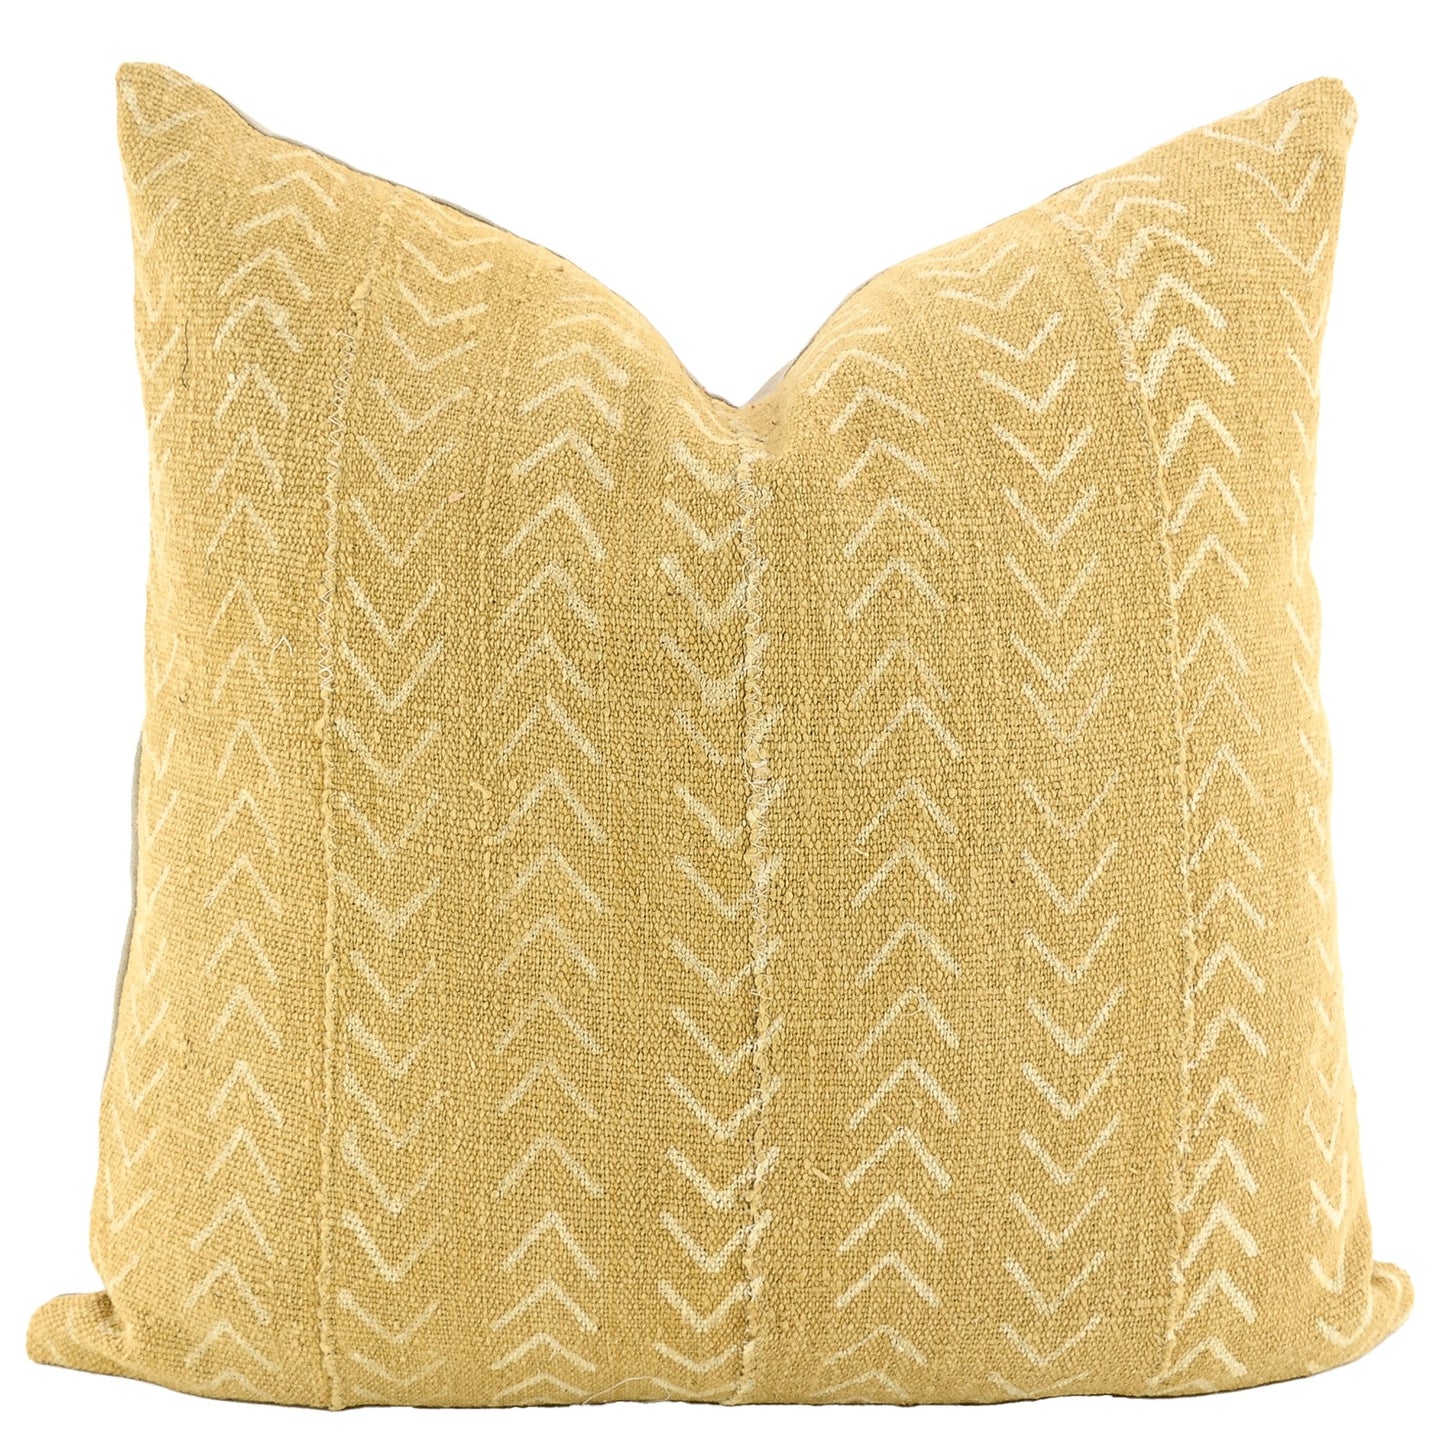 Front of pillow with rich mustard and white patterns made from a traditional handwoven mudcloth textile sheet from Mali West Africa